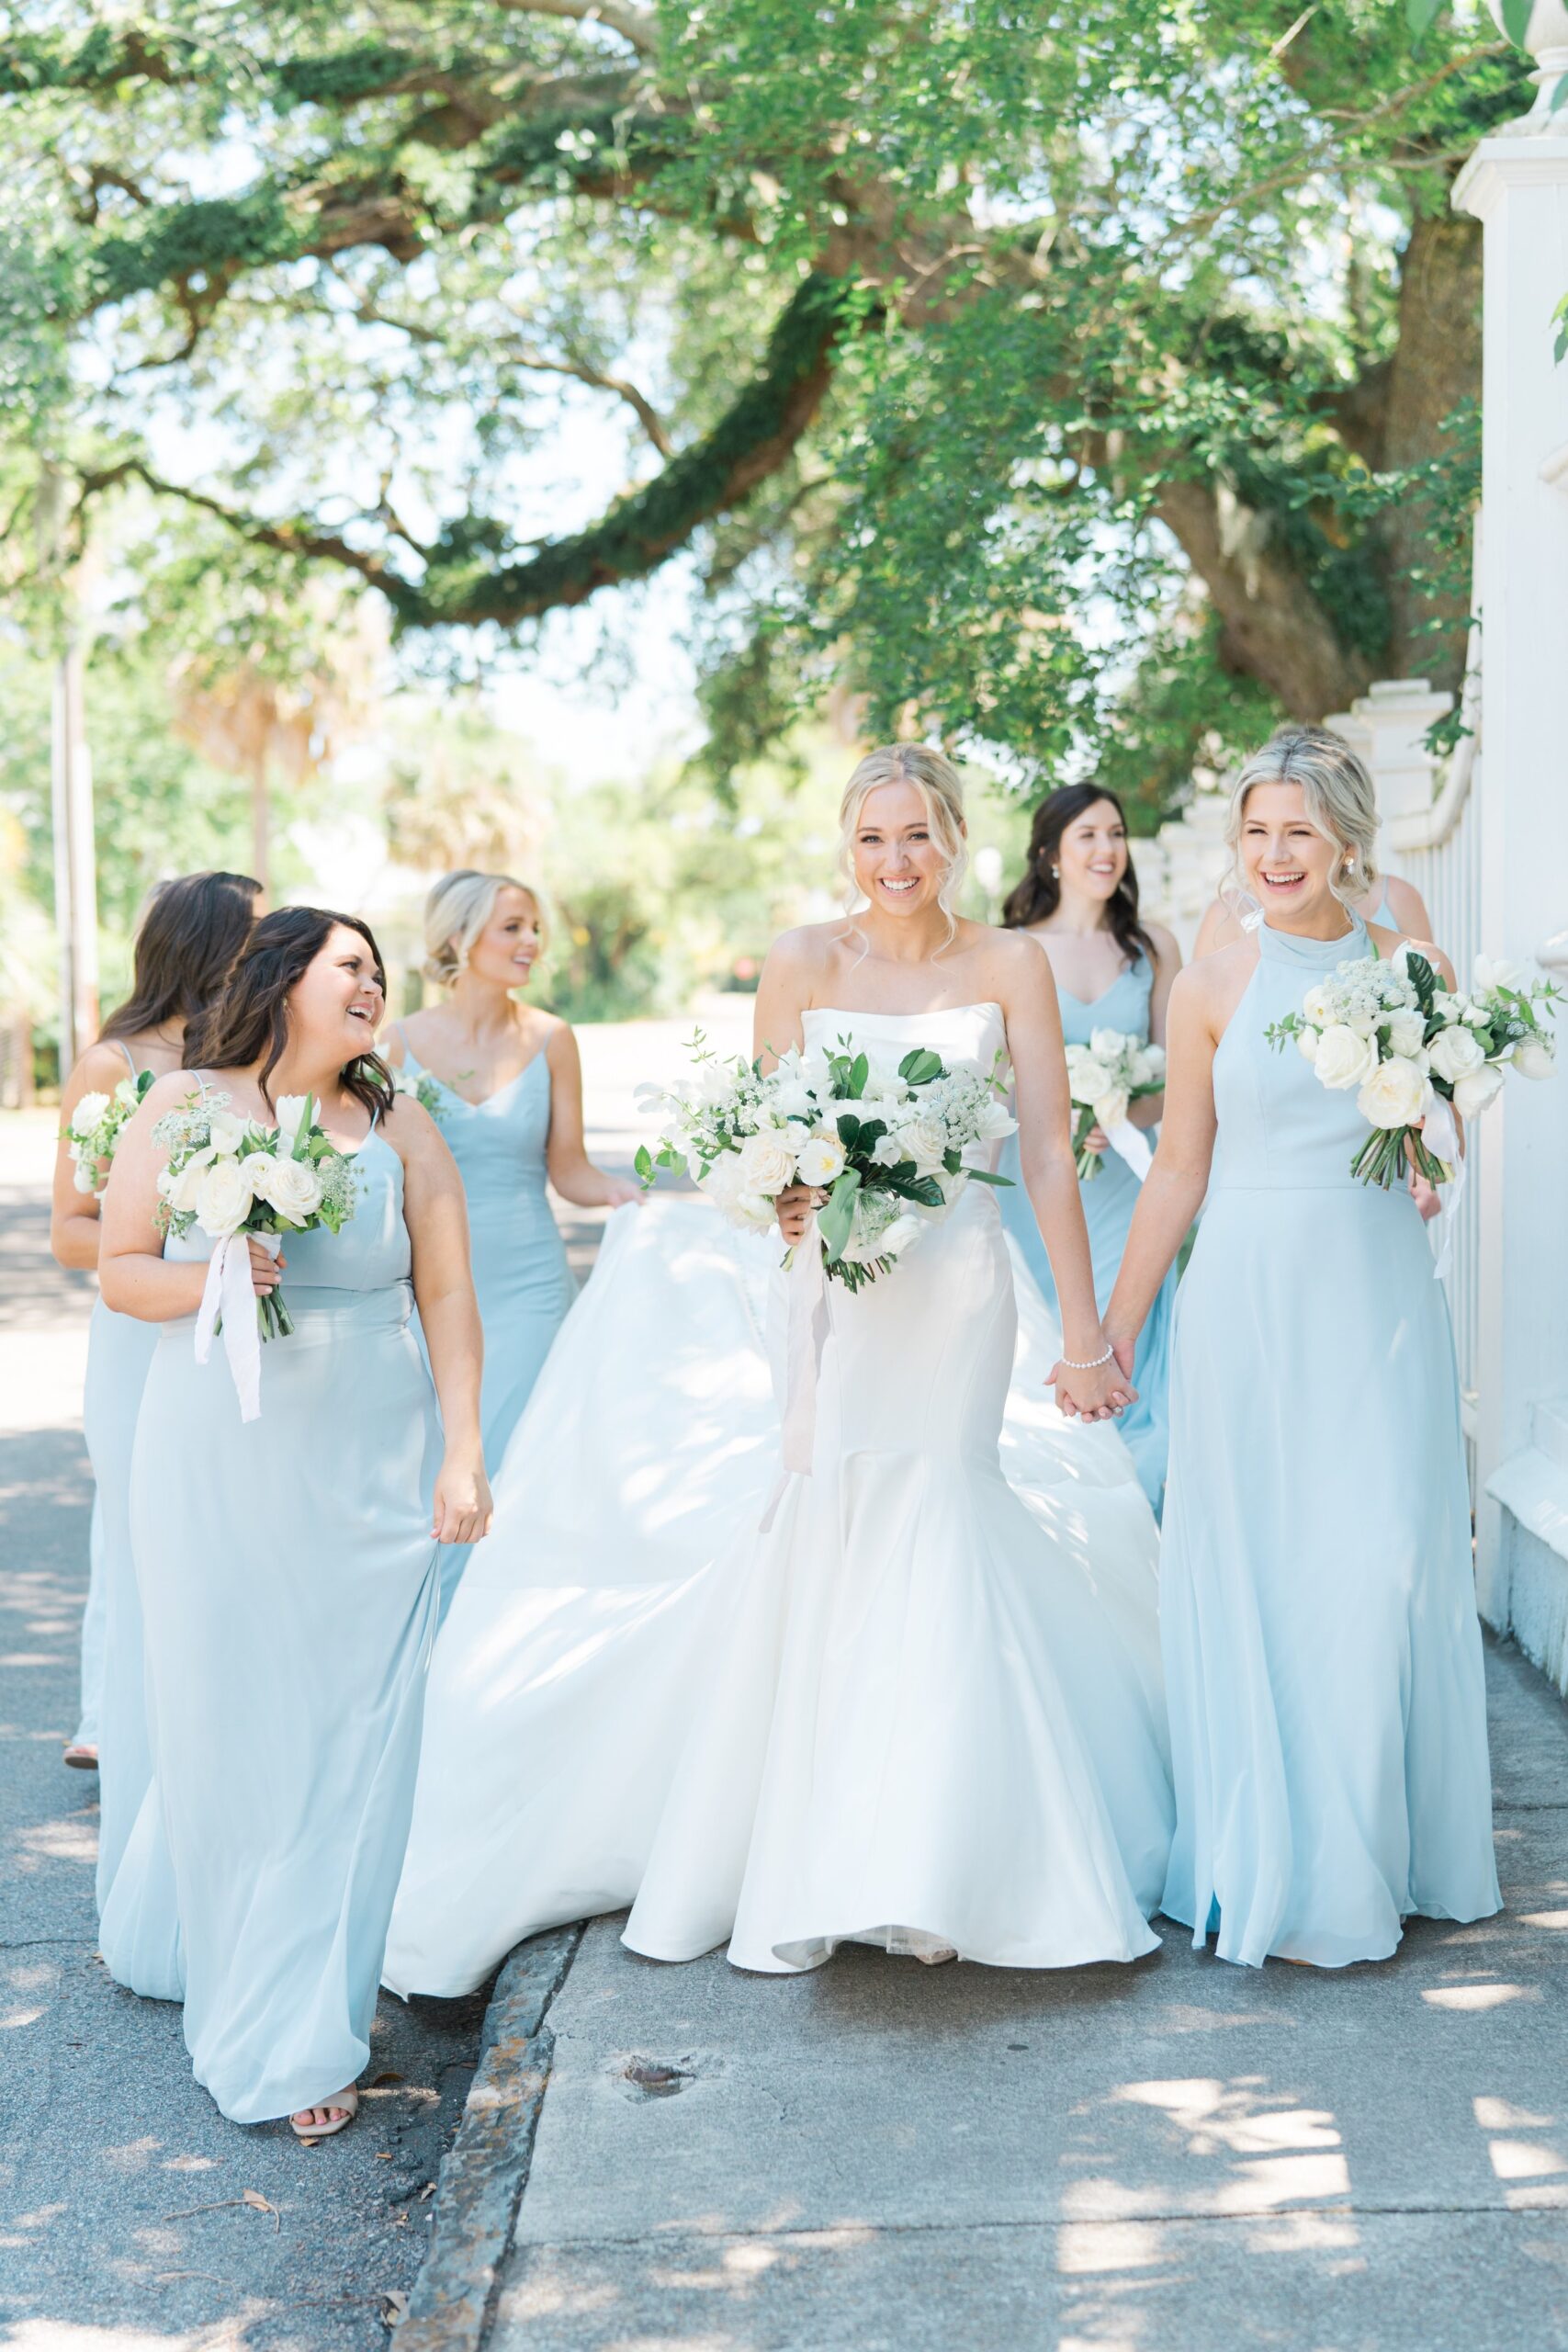 Bride walking with bridesmaids and holding hand of maid of honor. Downtown Charleston weddings. Bridesmaids in light blue dresses.